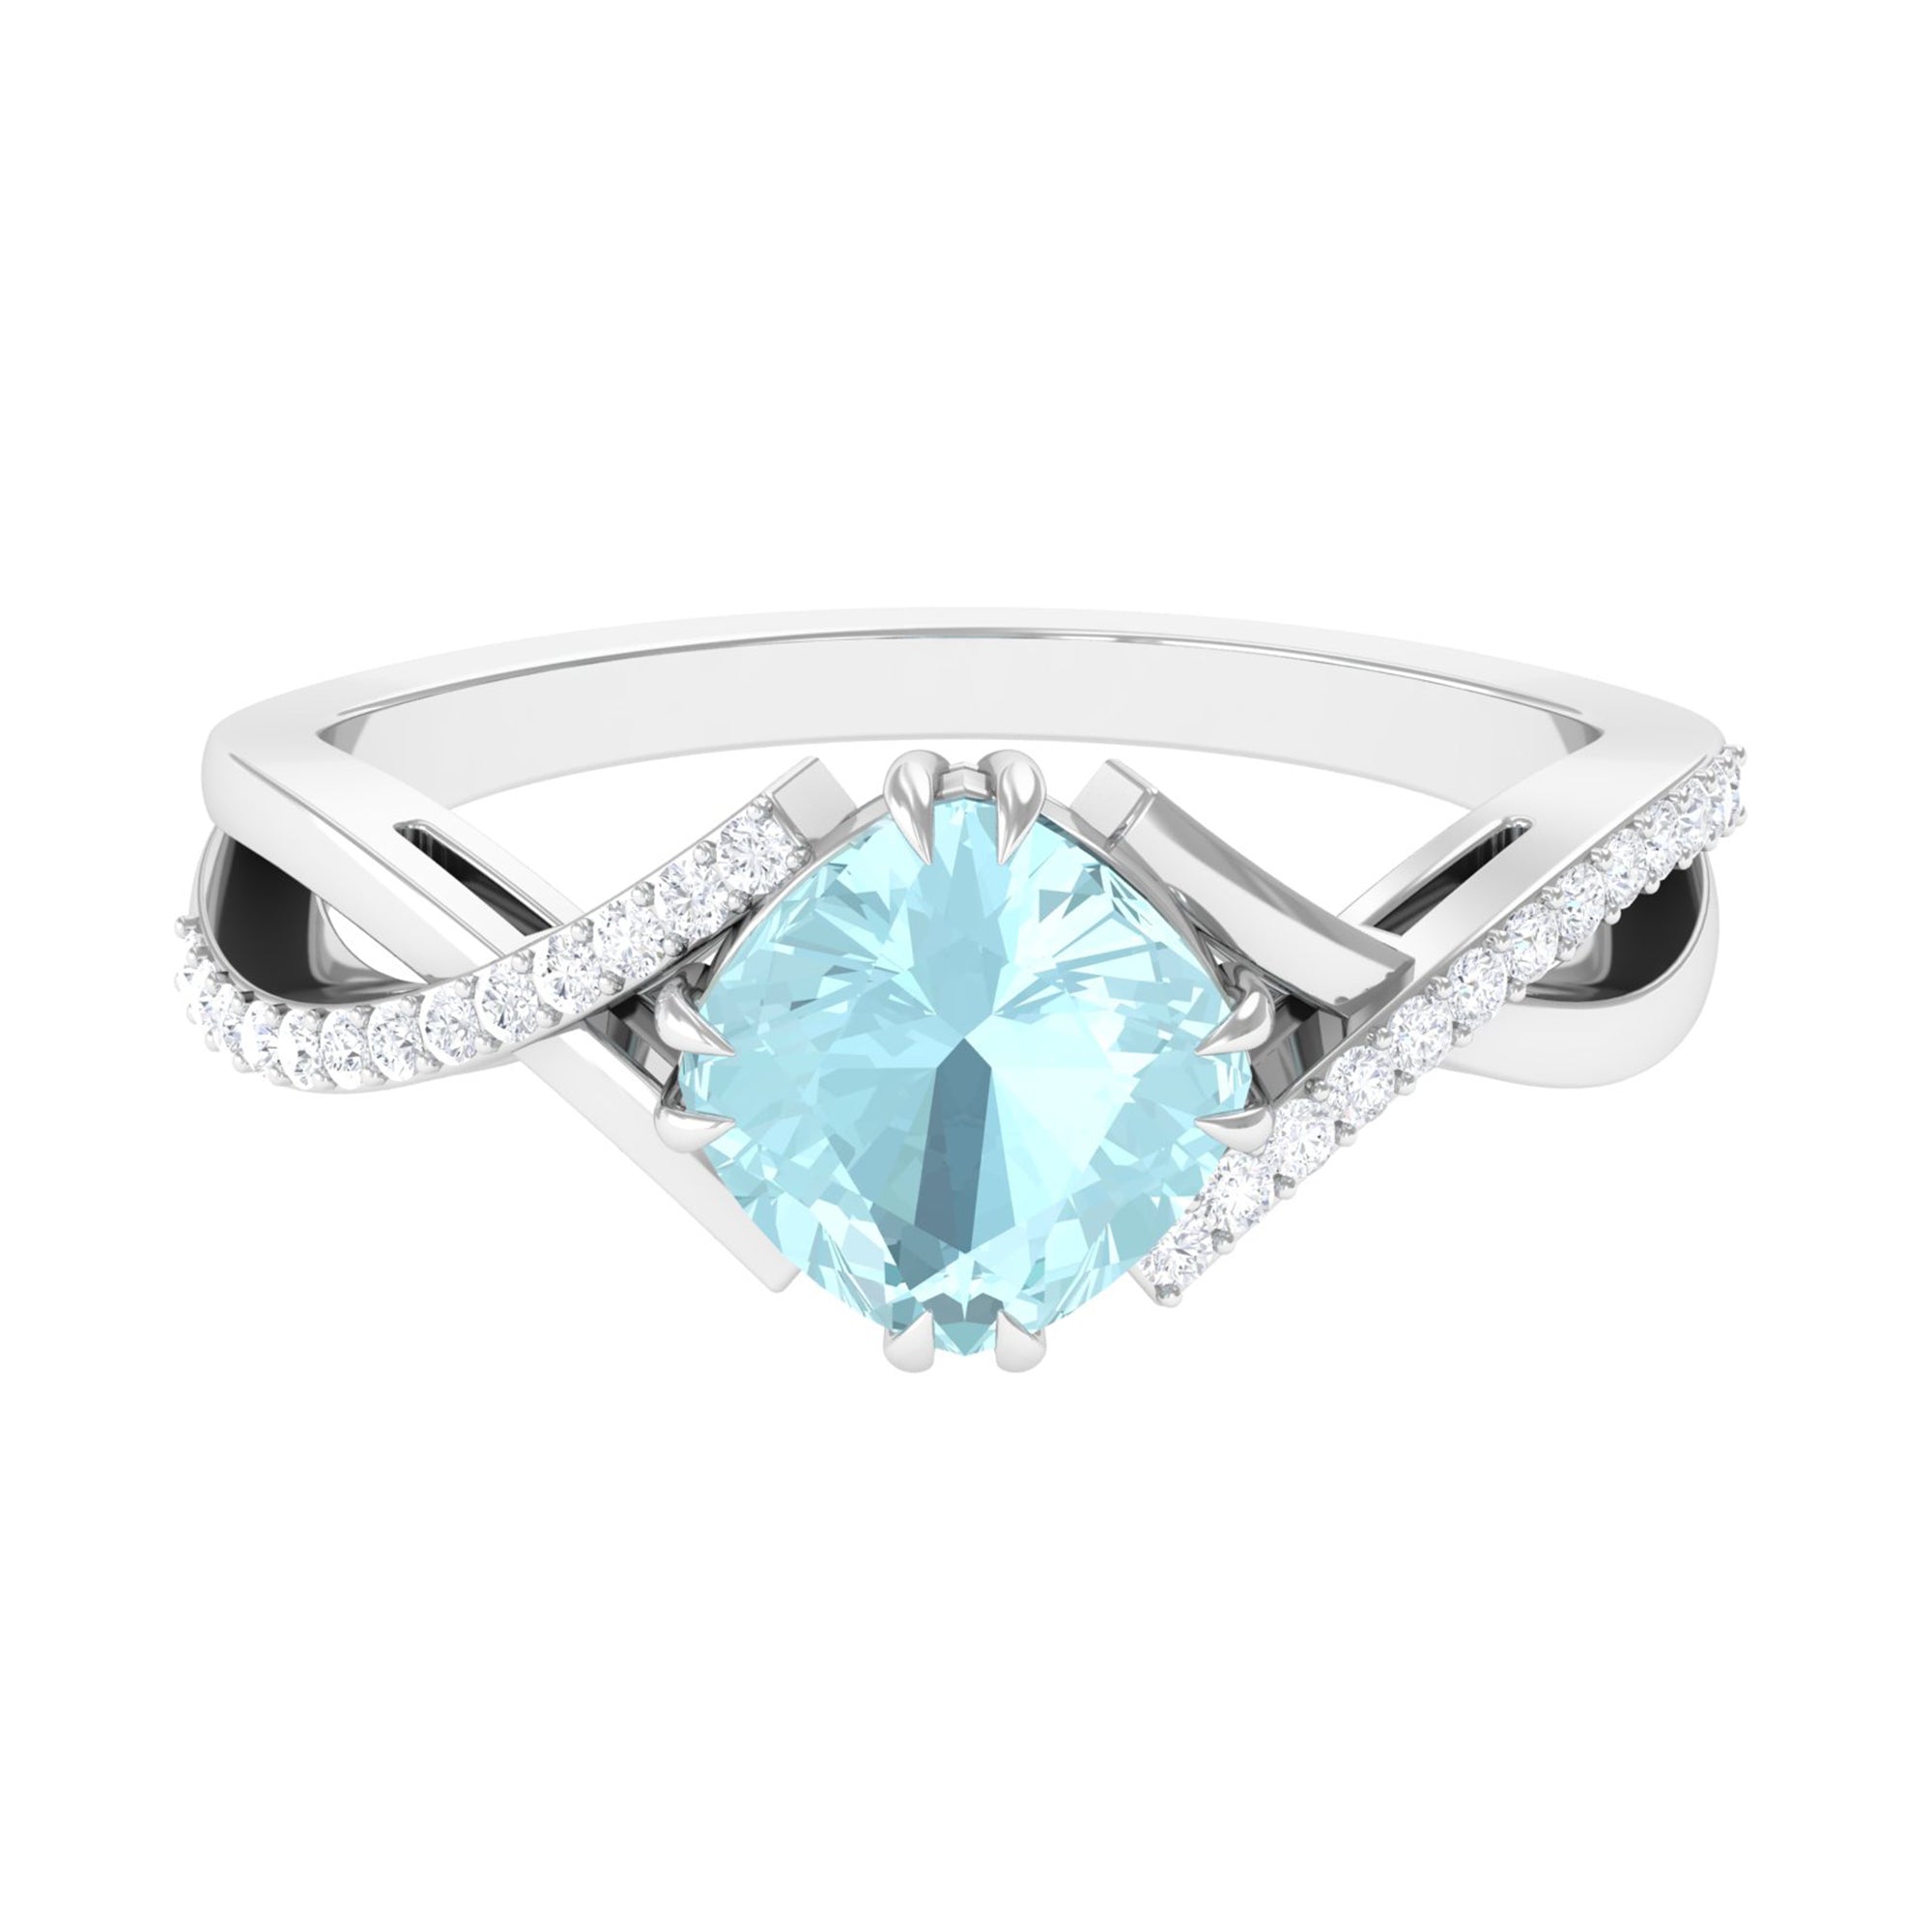 Cushion Cut Sky Blue Topaz Crossover Engagement Ring with Diamond Sky Blue Topaz - ( AAA ) - Quality - Rosec Jewels